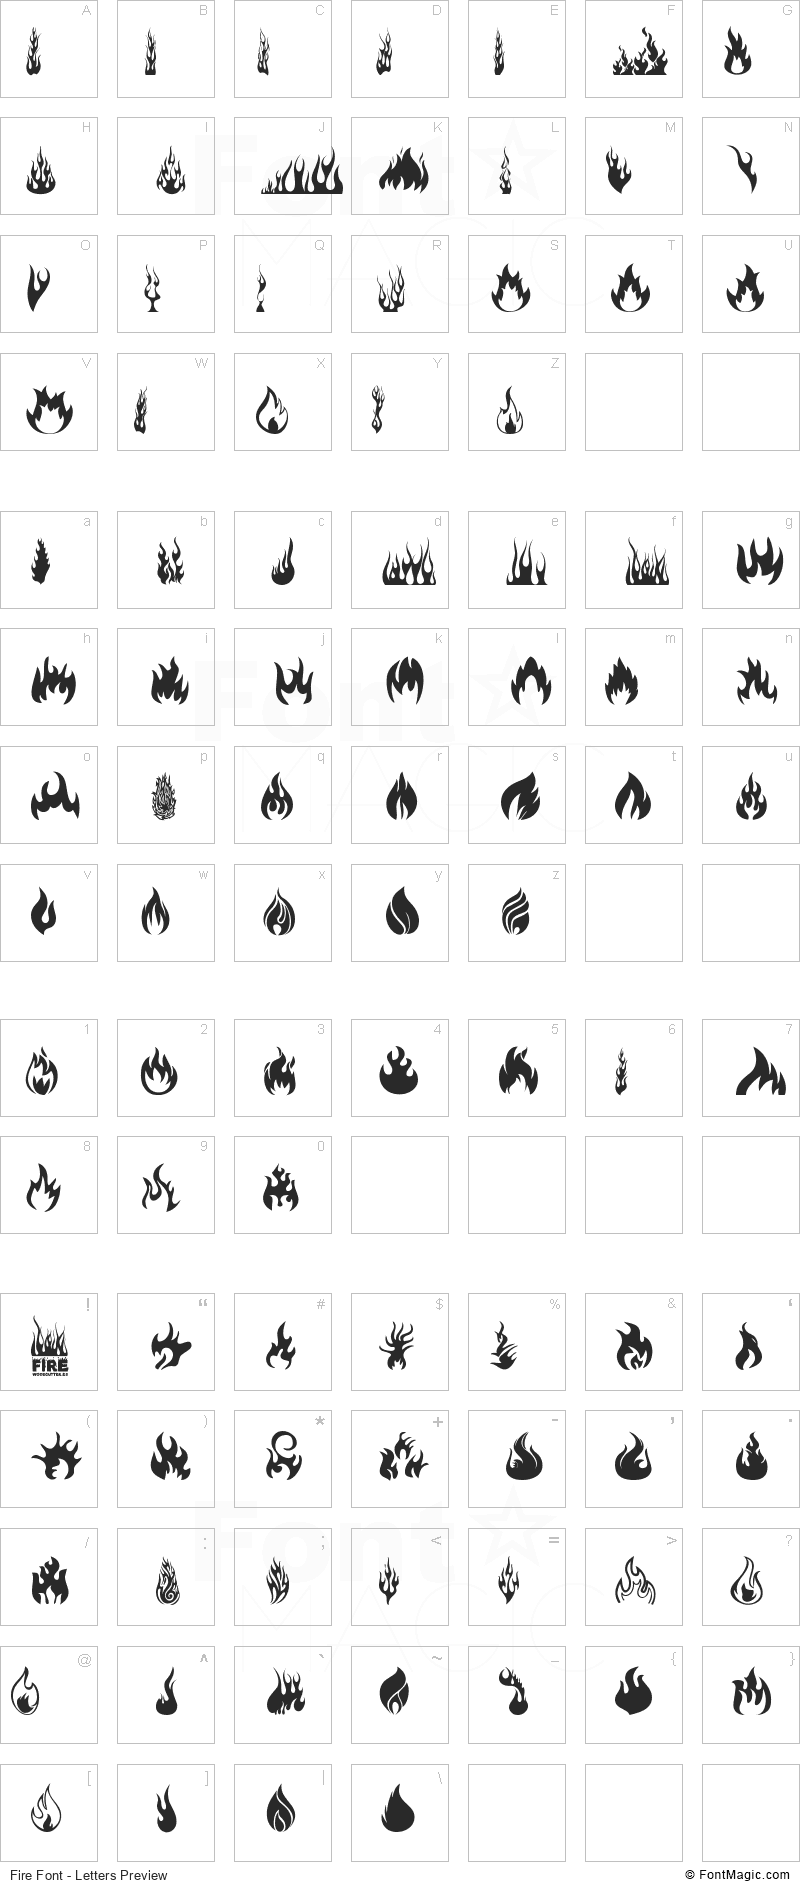 Fire Font - All Latters Preview Chart